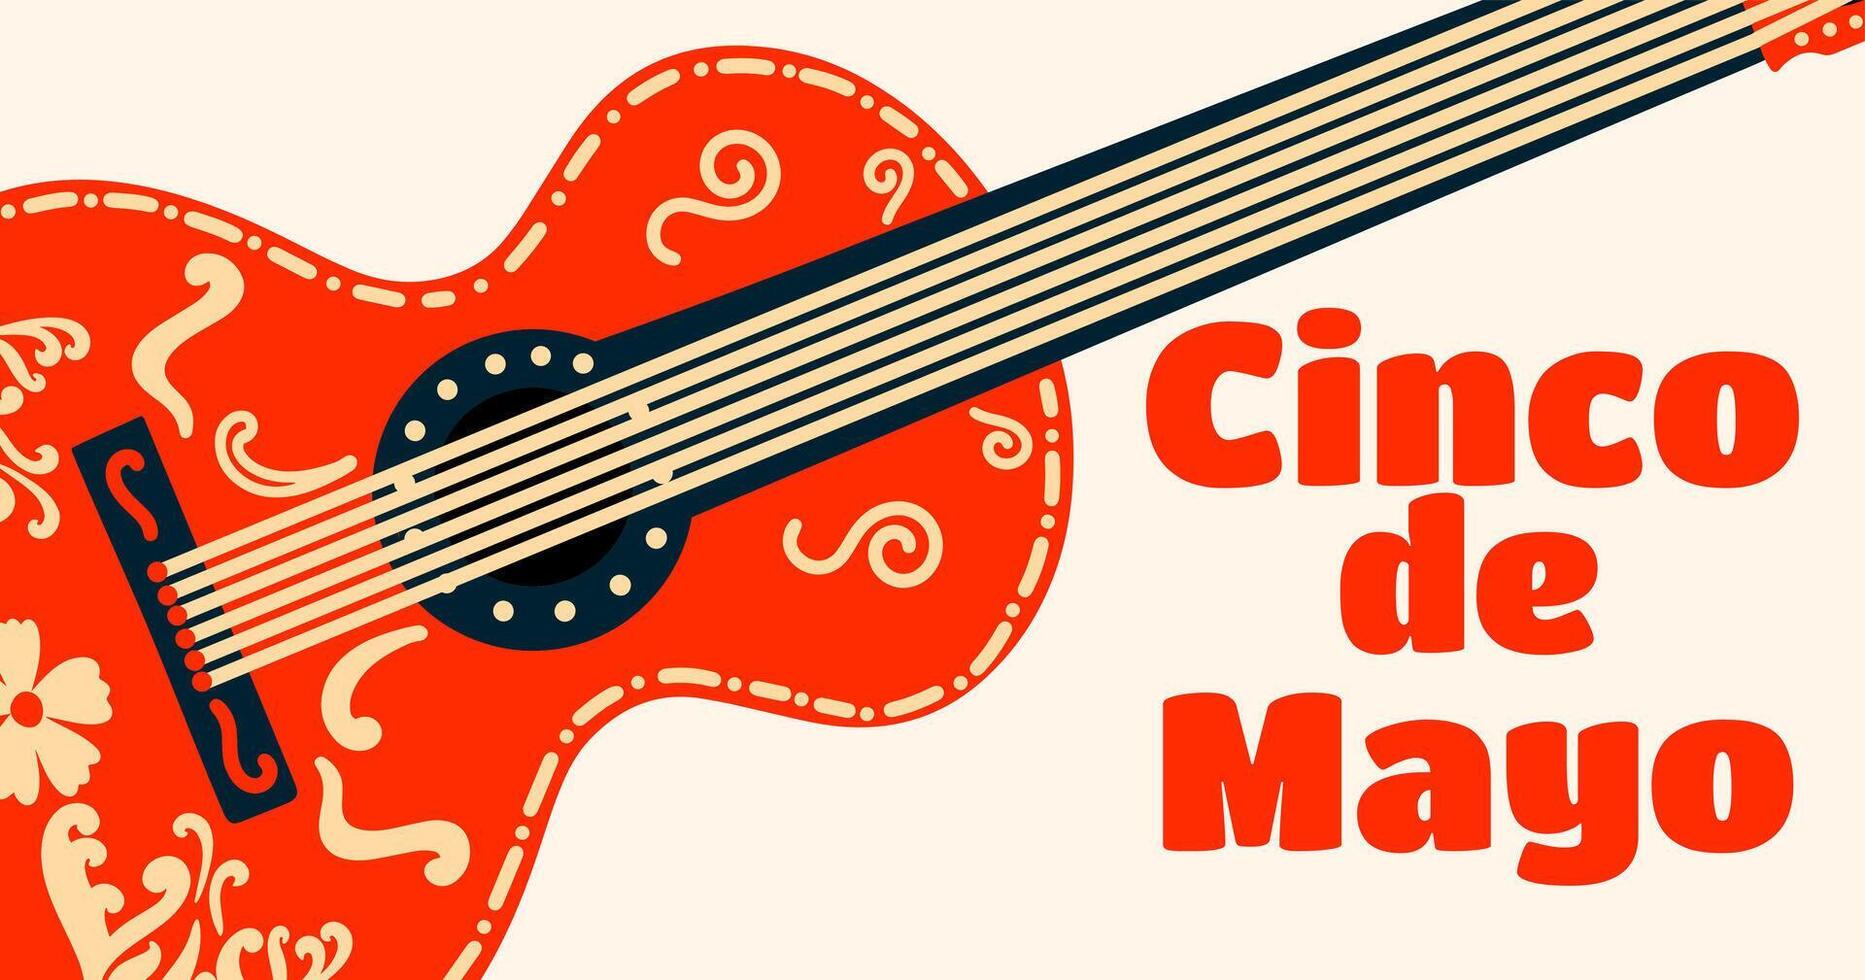 Cinco de Mayo festive banner. Holiday in Mexico. Colorful design poster with guitar. vector